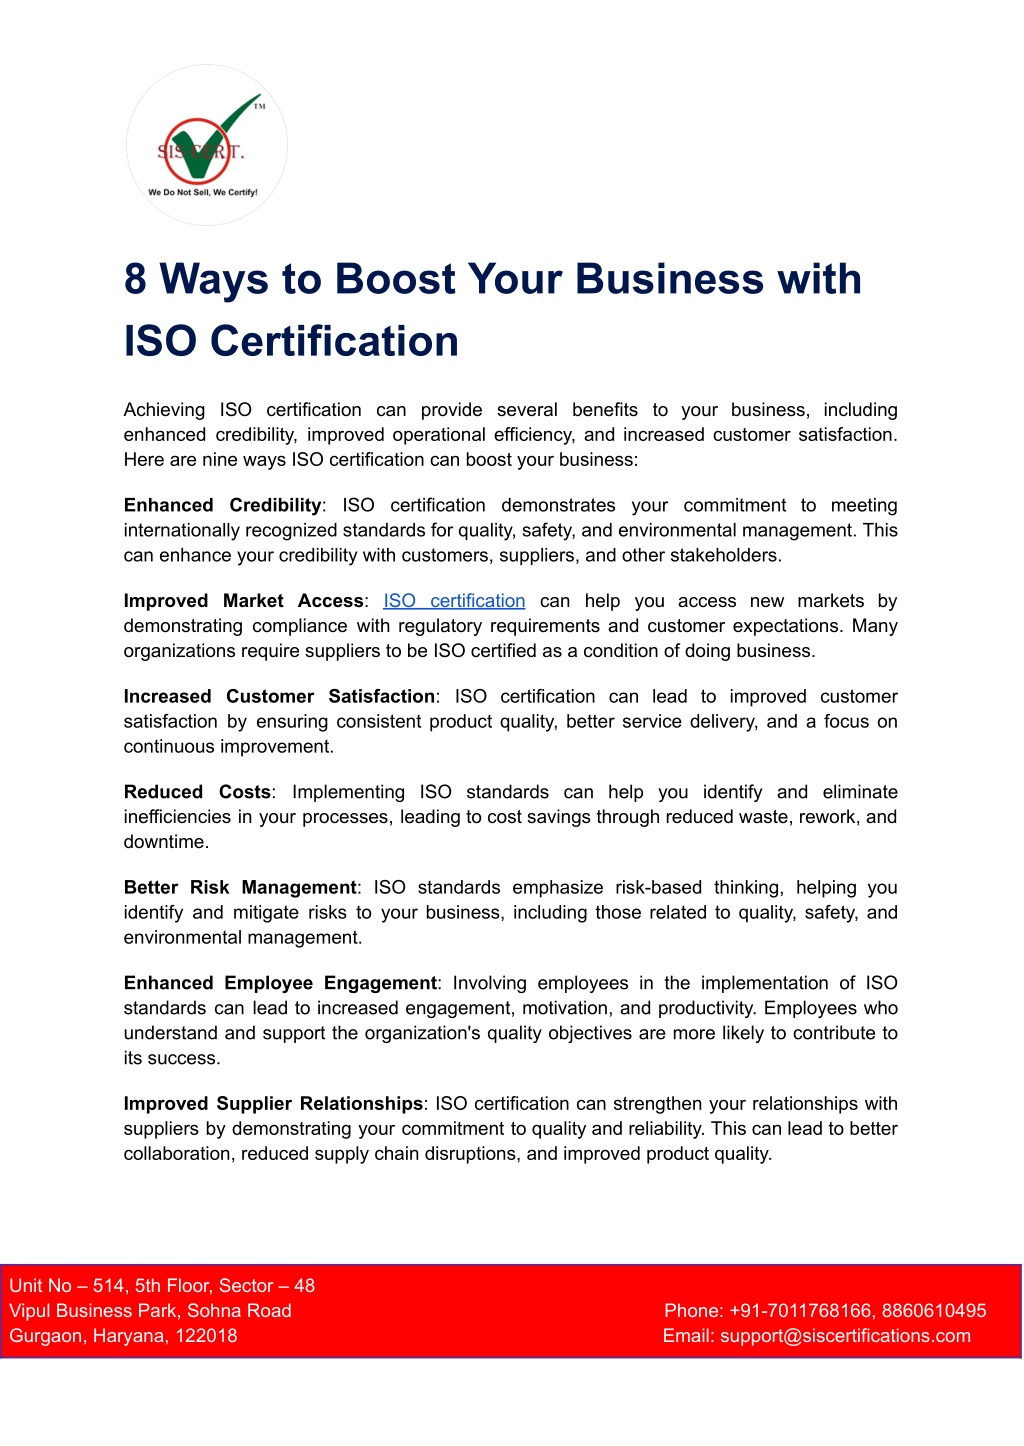 8 ways to boost your business with l.w